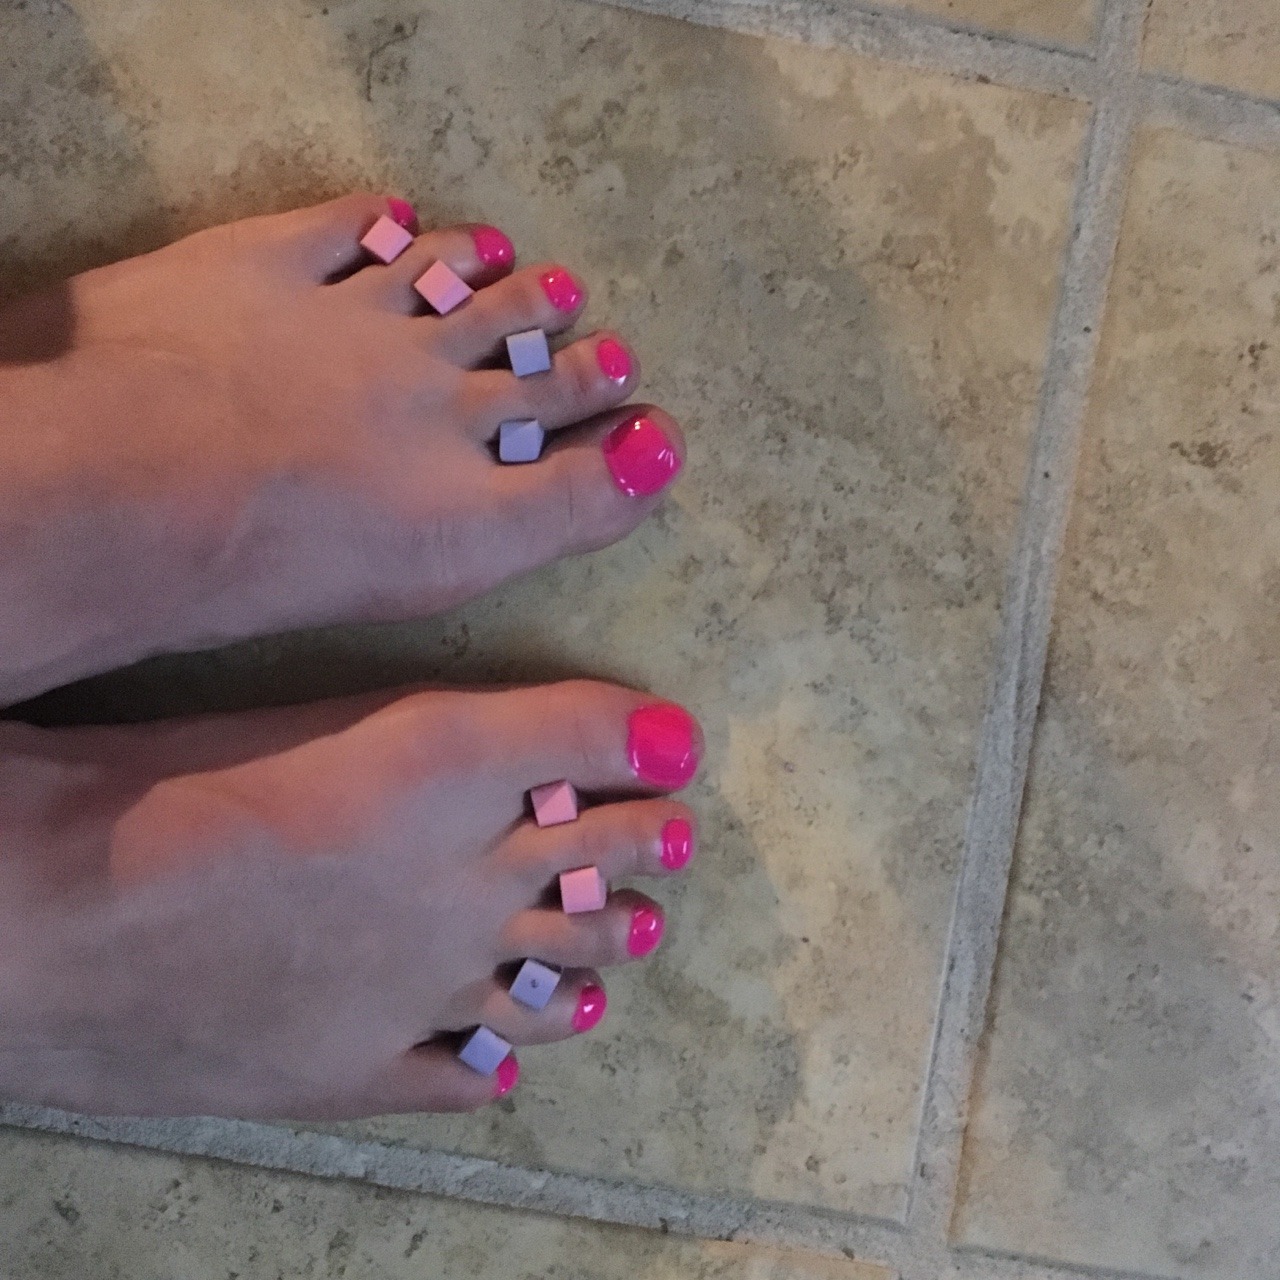 Decided to go with neon pink for the week   Love doing my nails  Love sissy cuck